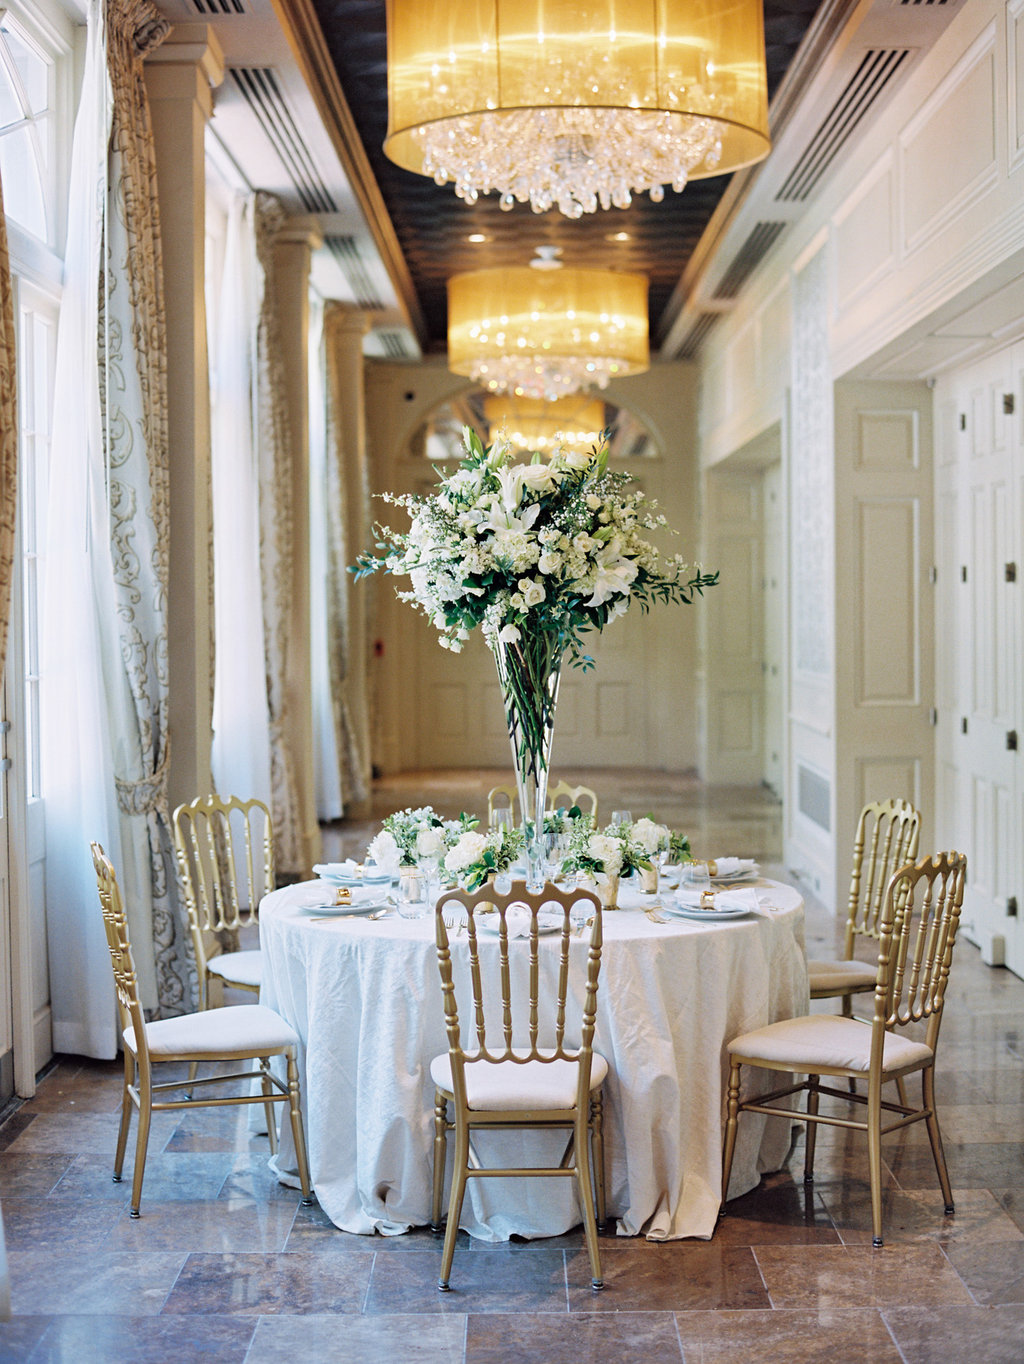 Tall white and green floral arrangement in the middle of a round table with a white table linen set for the wedding reception 